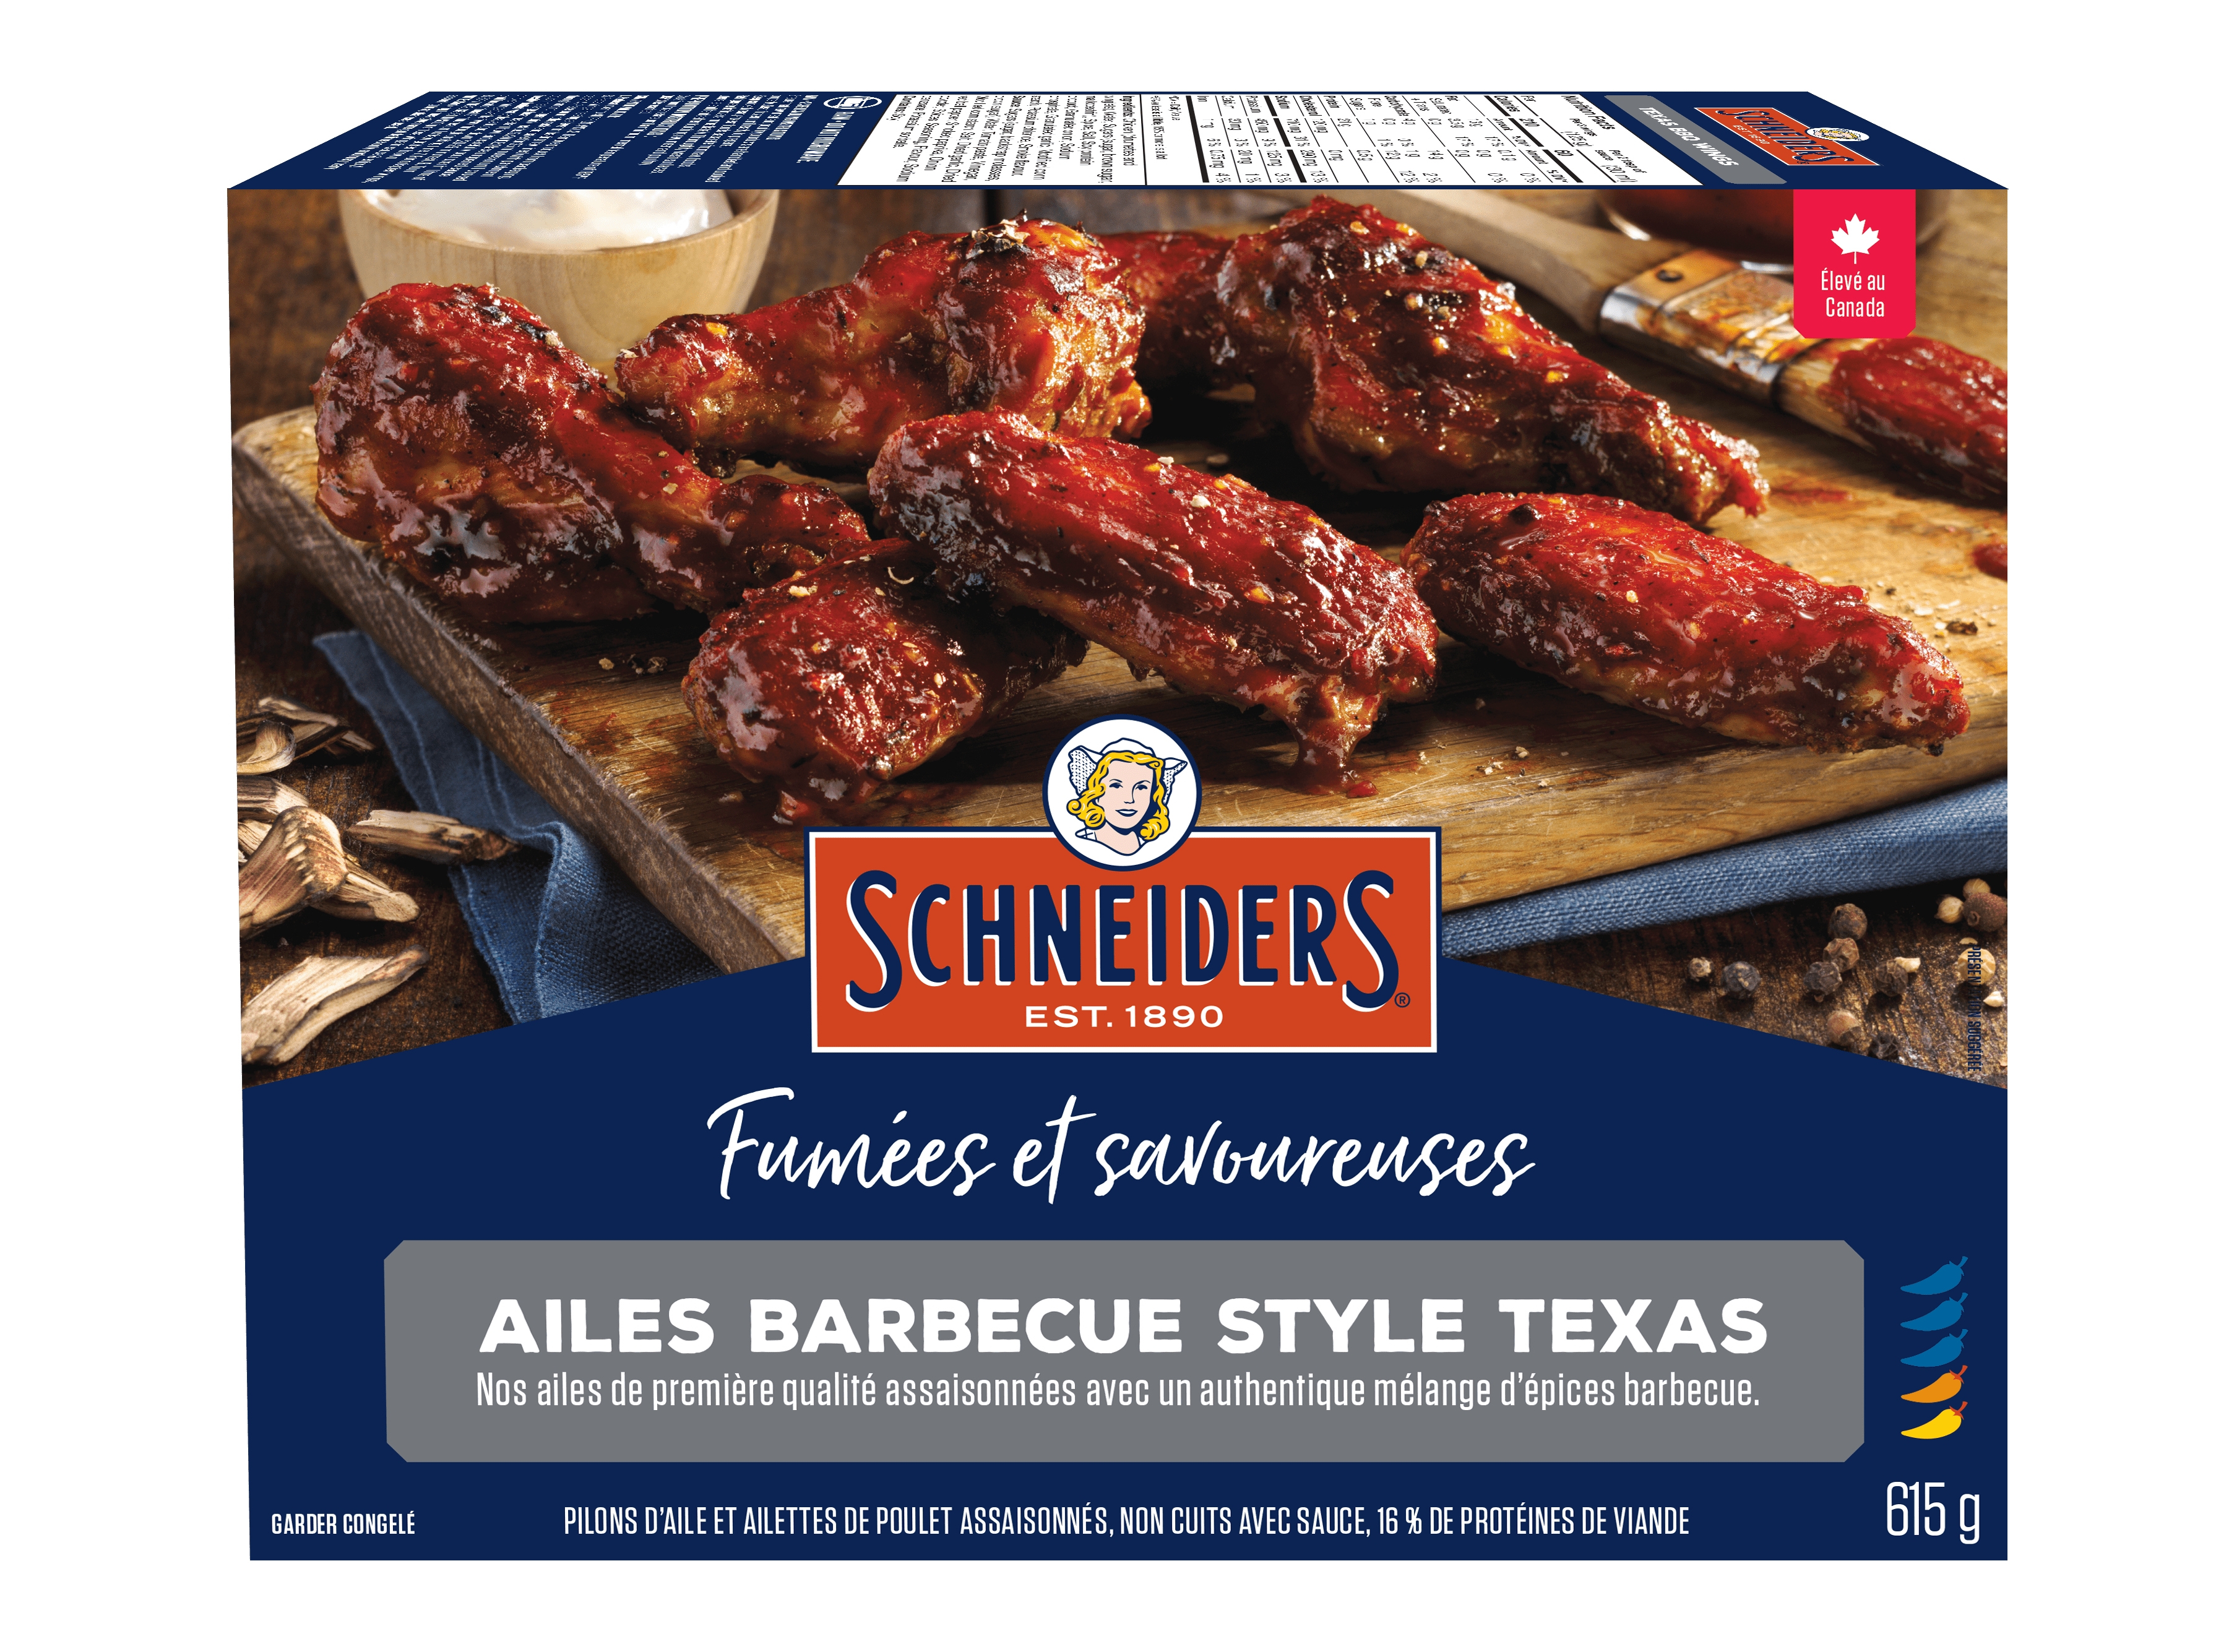 Ailes barbeque style Texas